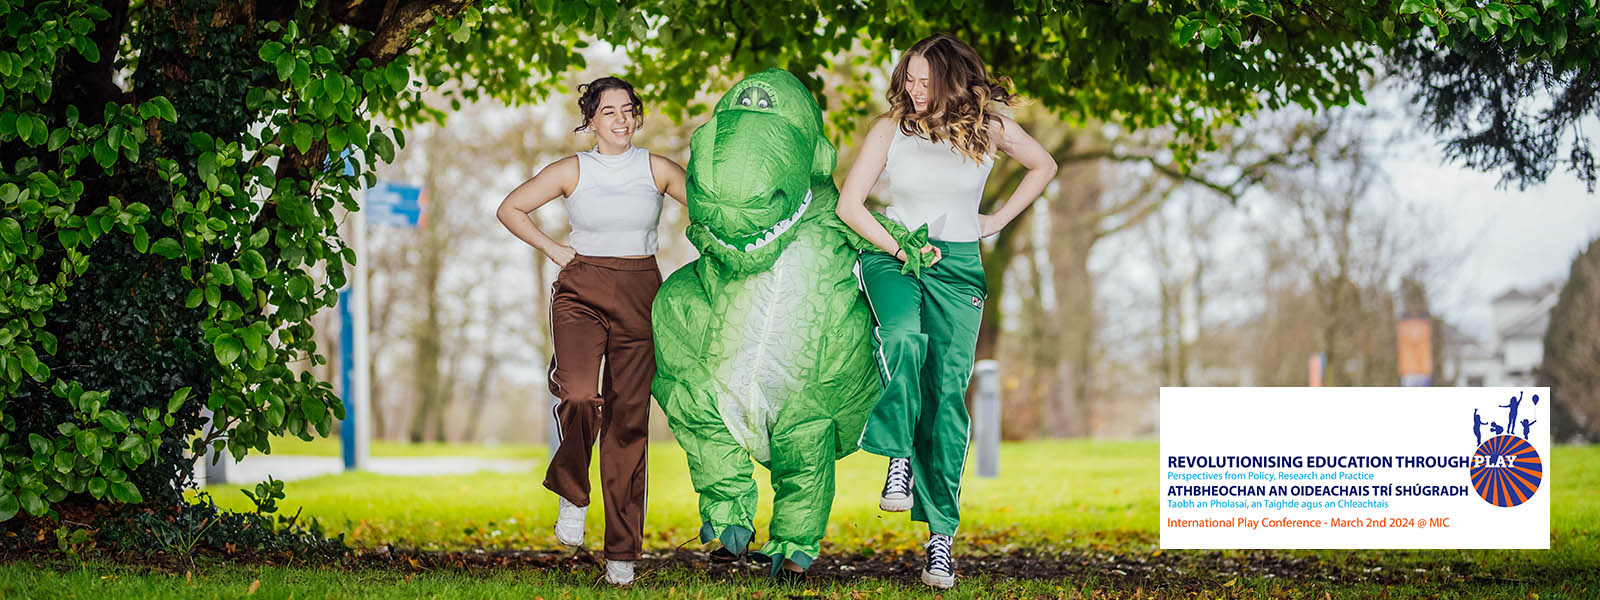 Two women skipping with an inflated green dinosaur on the grounds of MIC